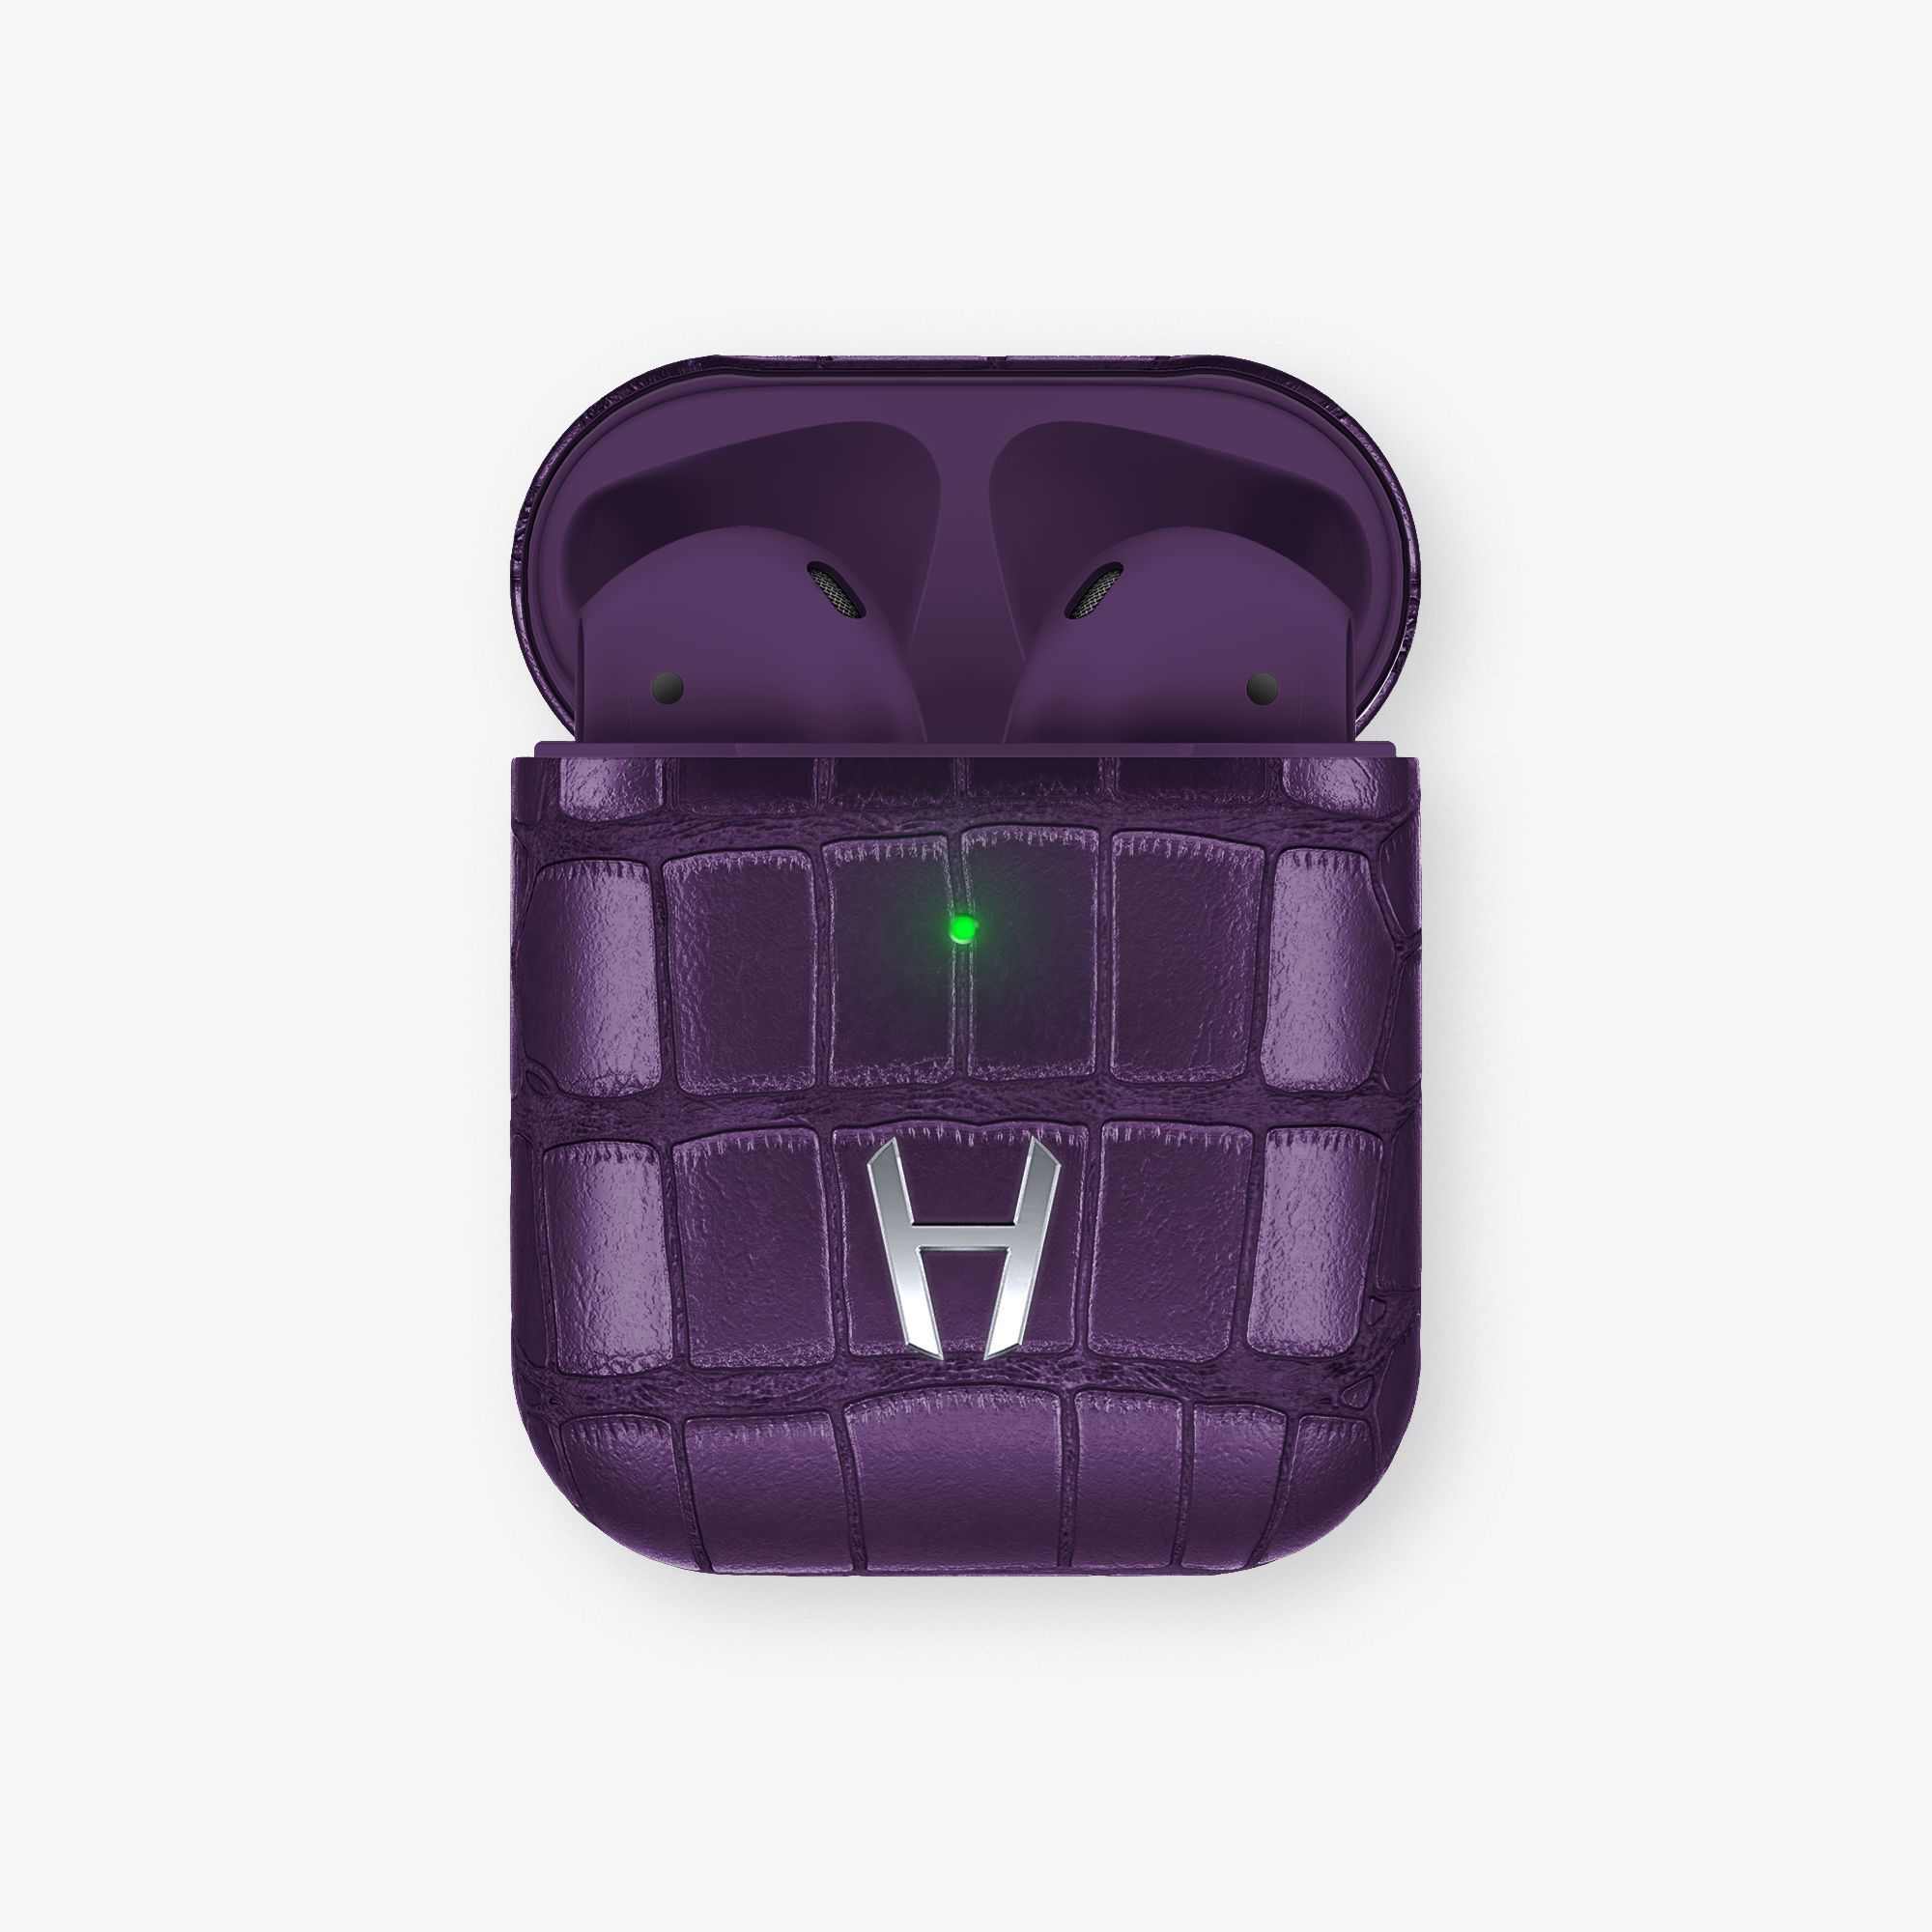 Alligator Airpods with Wireless Charging Case | Violet Purple - Stainless Steel